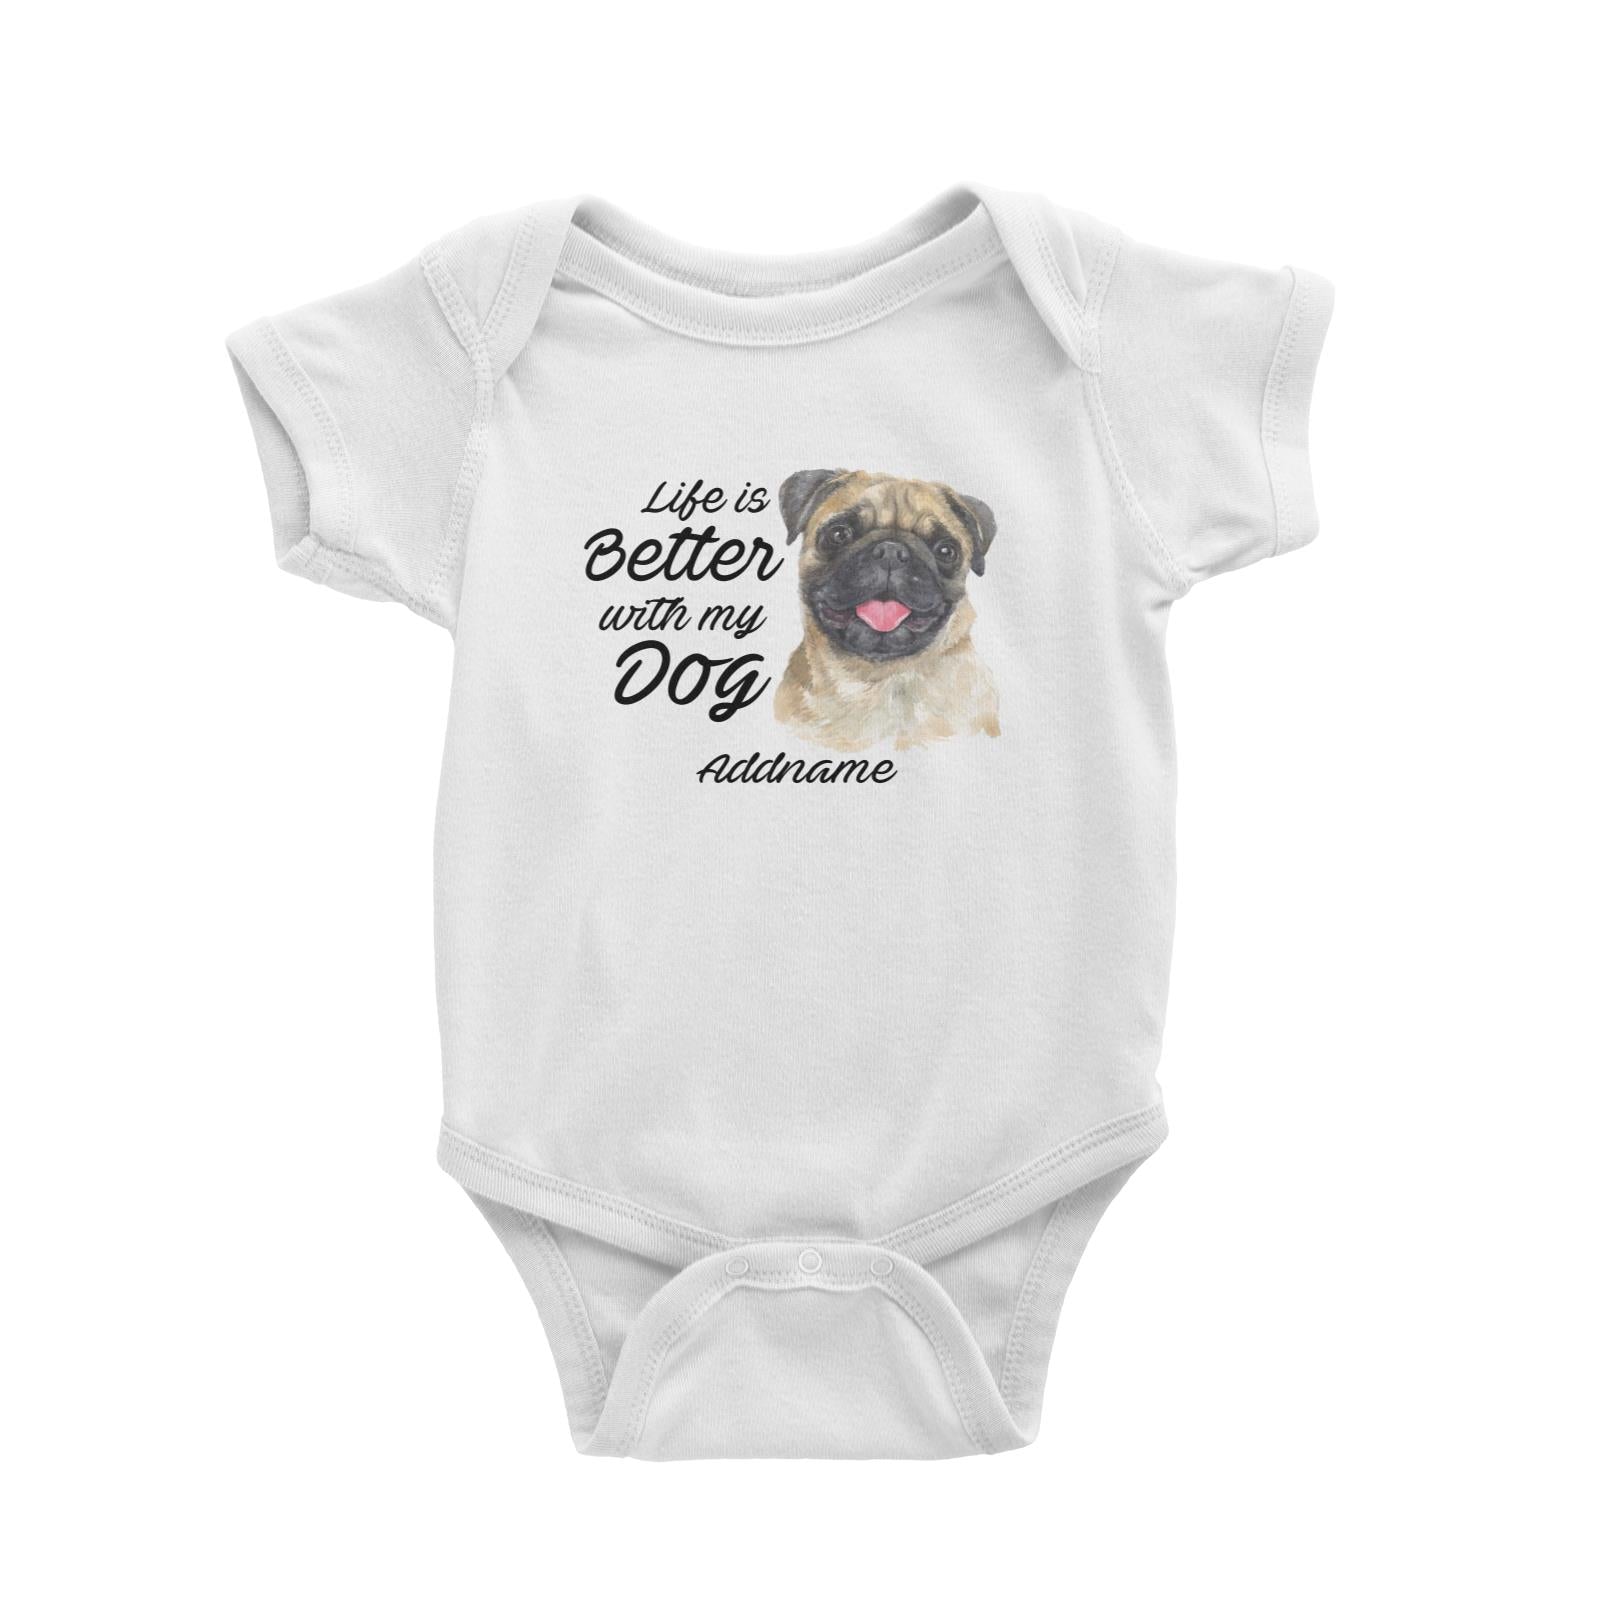 Watercolor Life is Better With My Dog Pug Addname Baby Romper